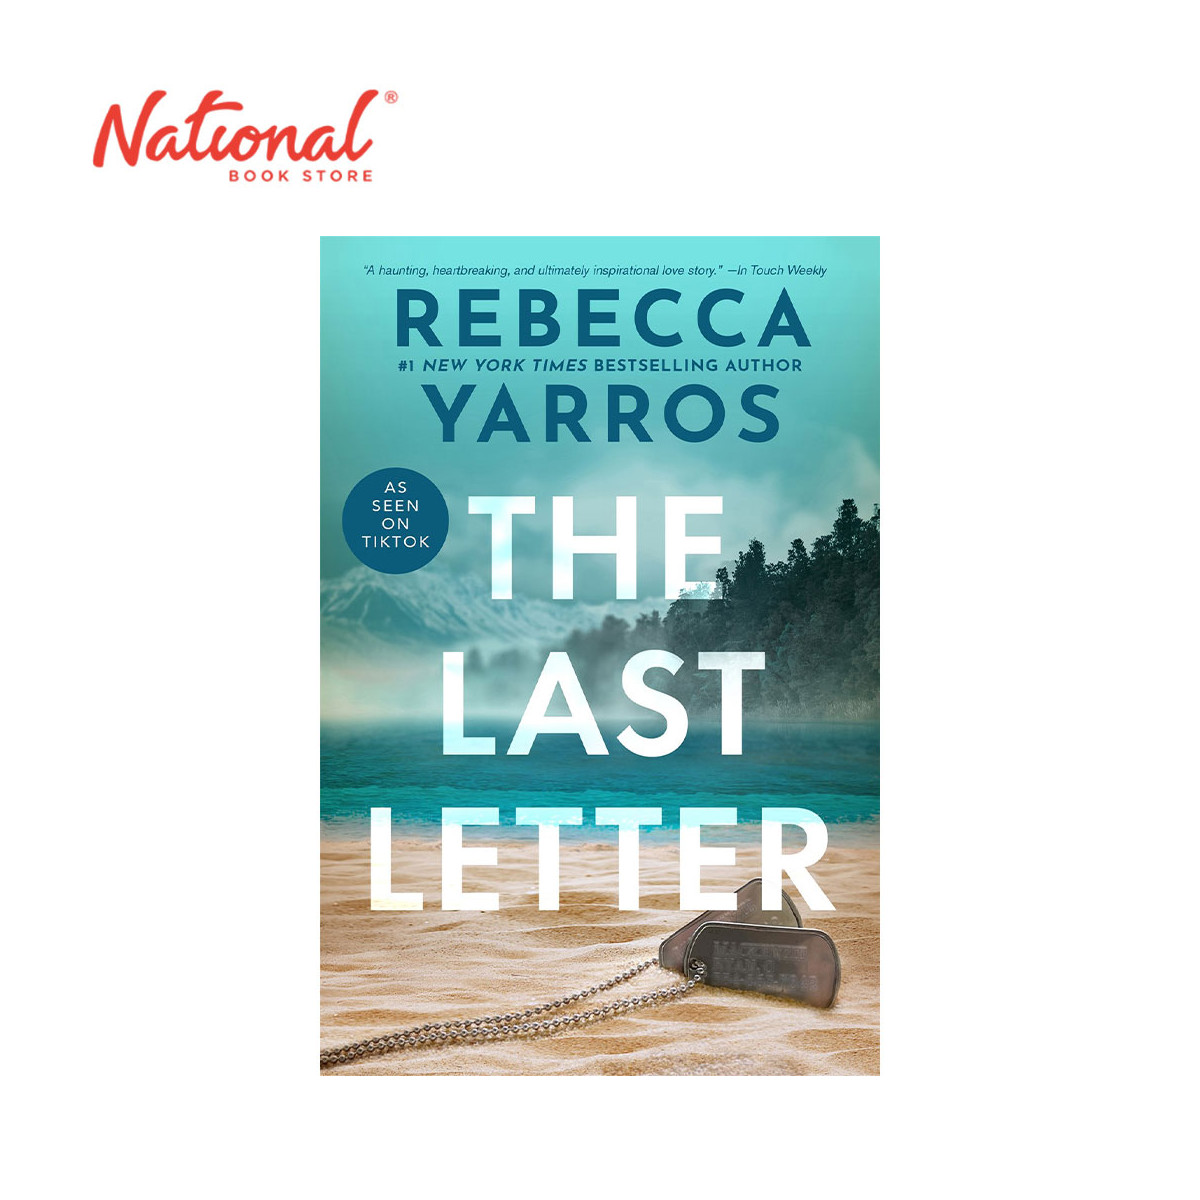 The Last Letter by Rebecca Yarros - Trade Paperback - Romance Fiction